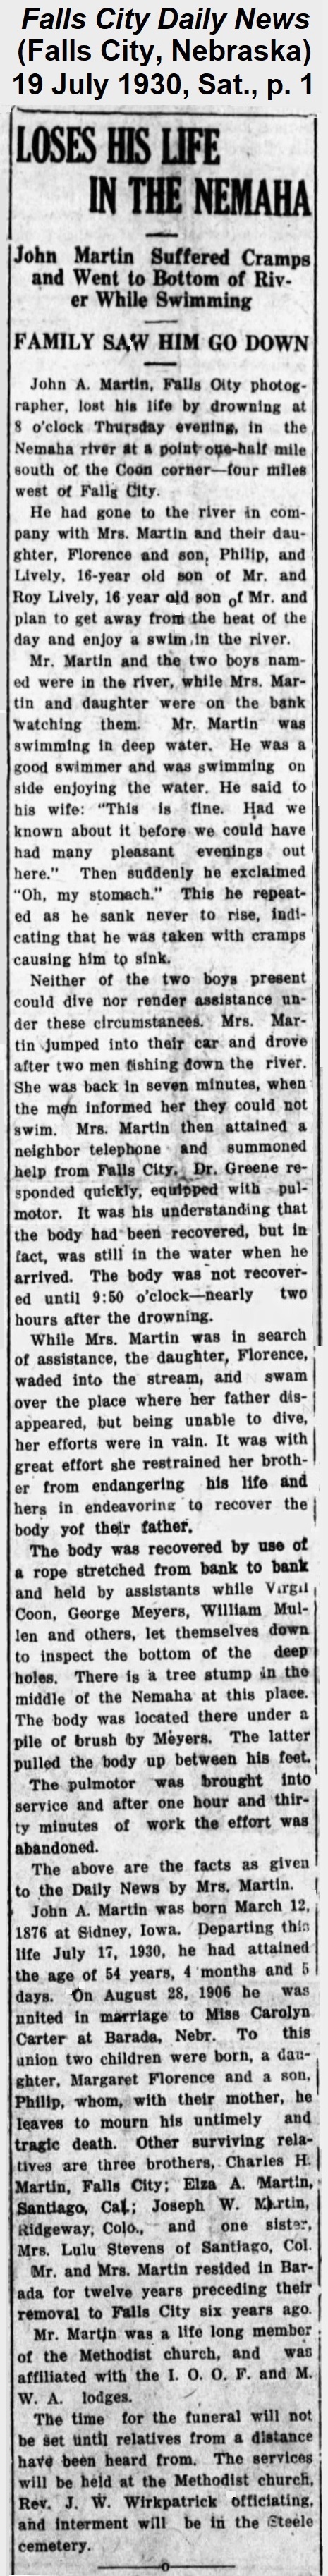 Report from The Falls City Daily
              News of 19 July 1930, headed 'Loses His Life in the Nemaha.'